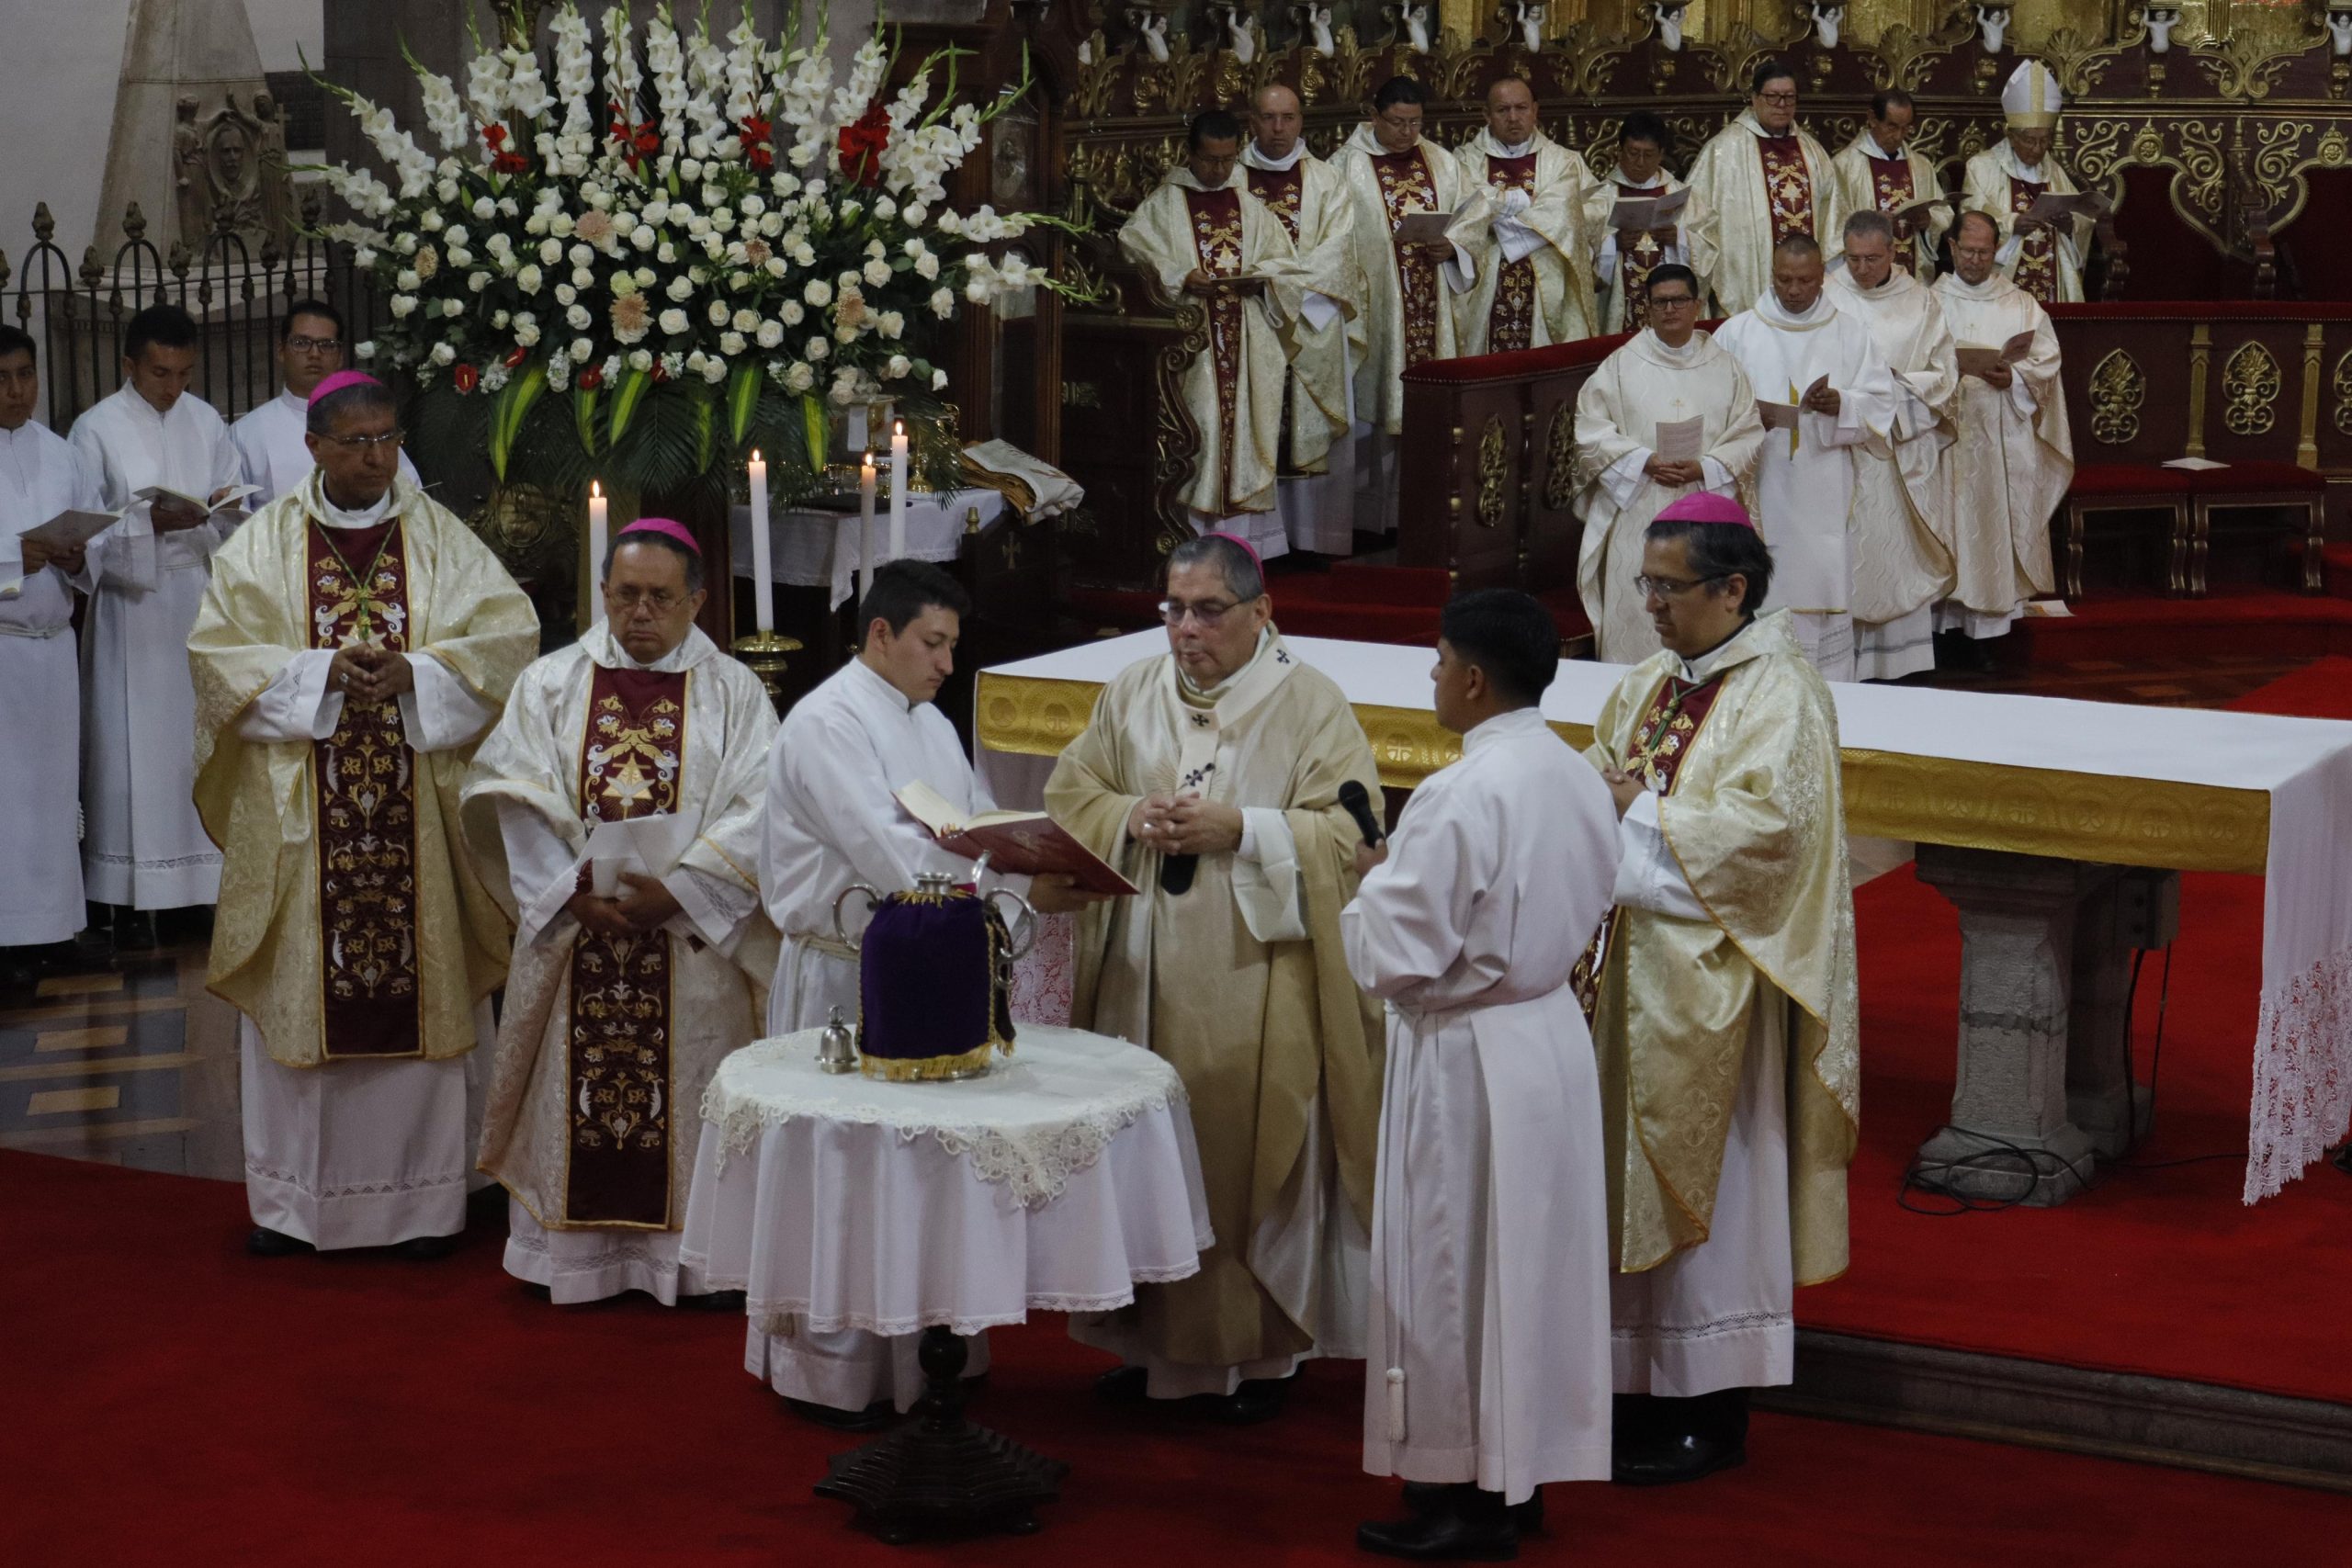 “Fraternity is not and should not be theoretical,” says the Archbishop of Quito to his clergy